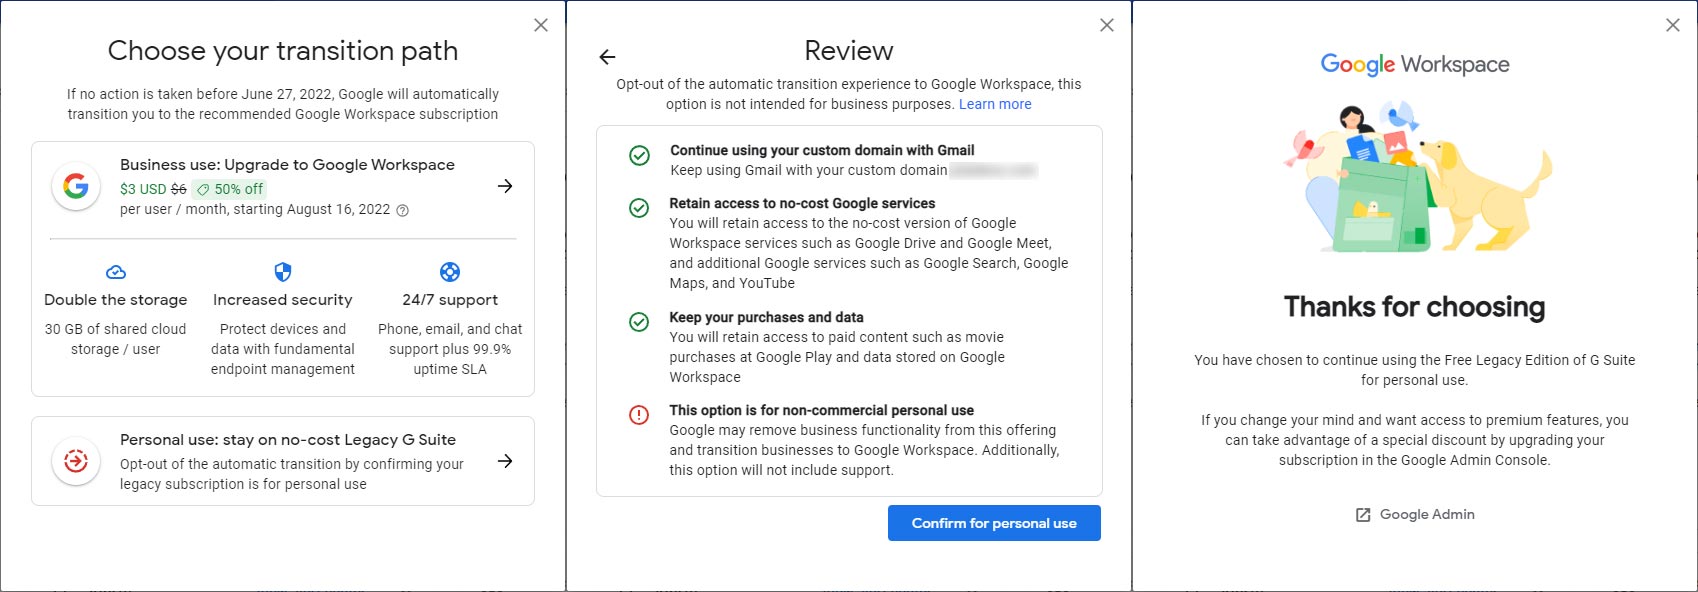 Screenshots of the transition to free Legacy G Suite for personal use.